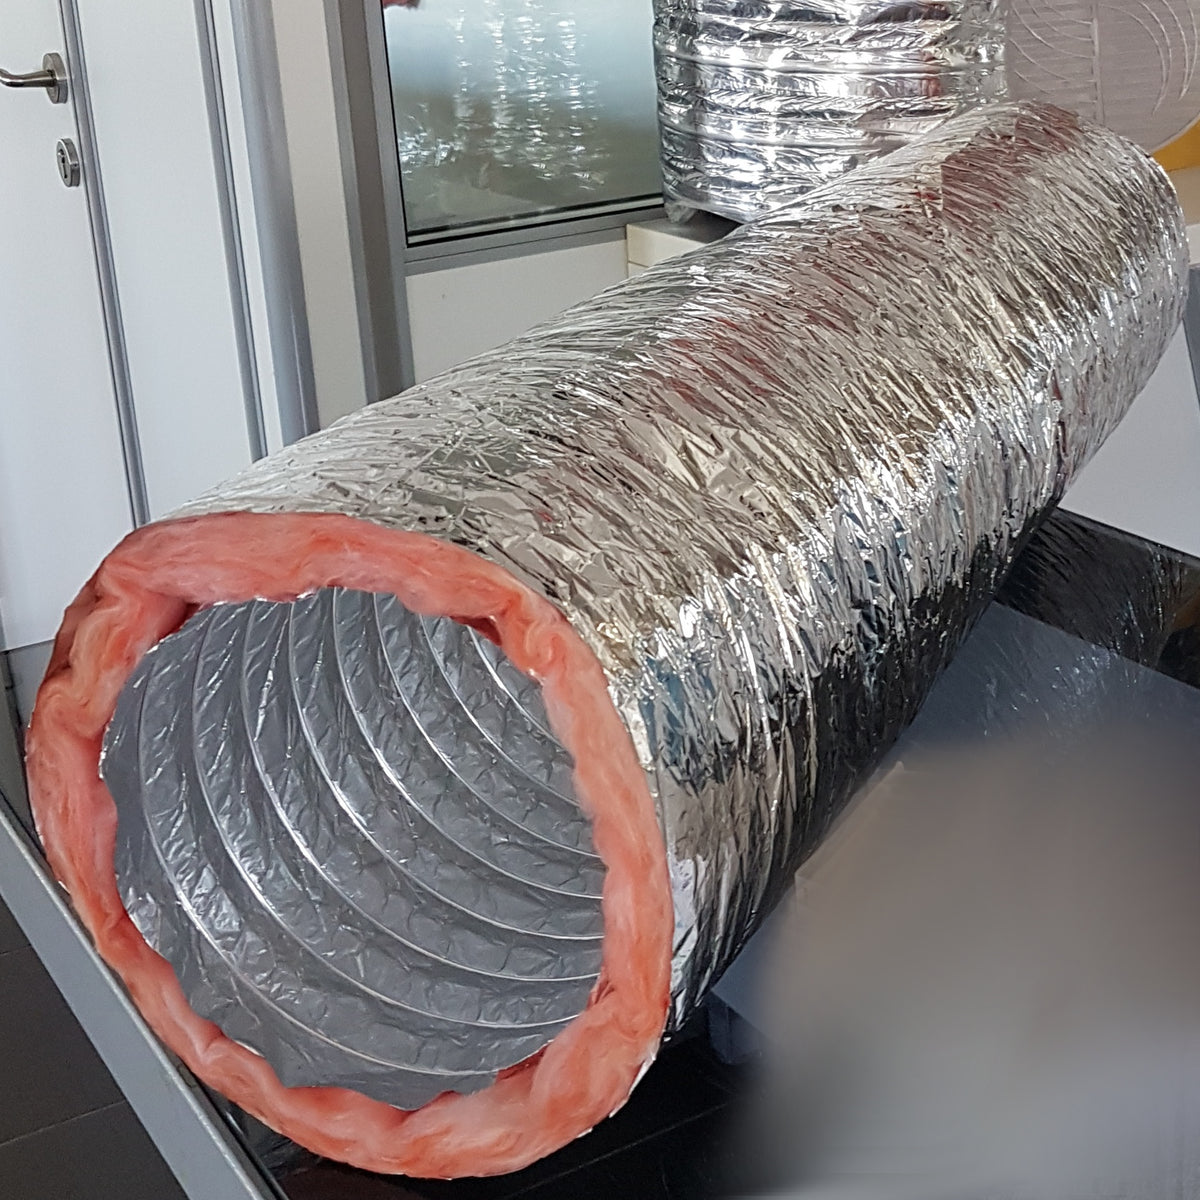 14&quot; Inch Aluminum Hose Flexible Insulated R-8.0 Air Duct Pipe for Rigid HVAC Flex Ductwork Insulation - 25&#39; Feet Long